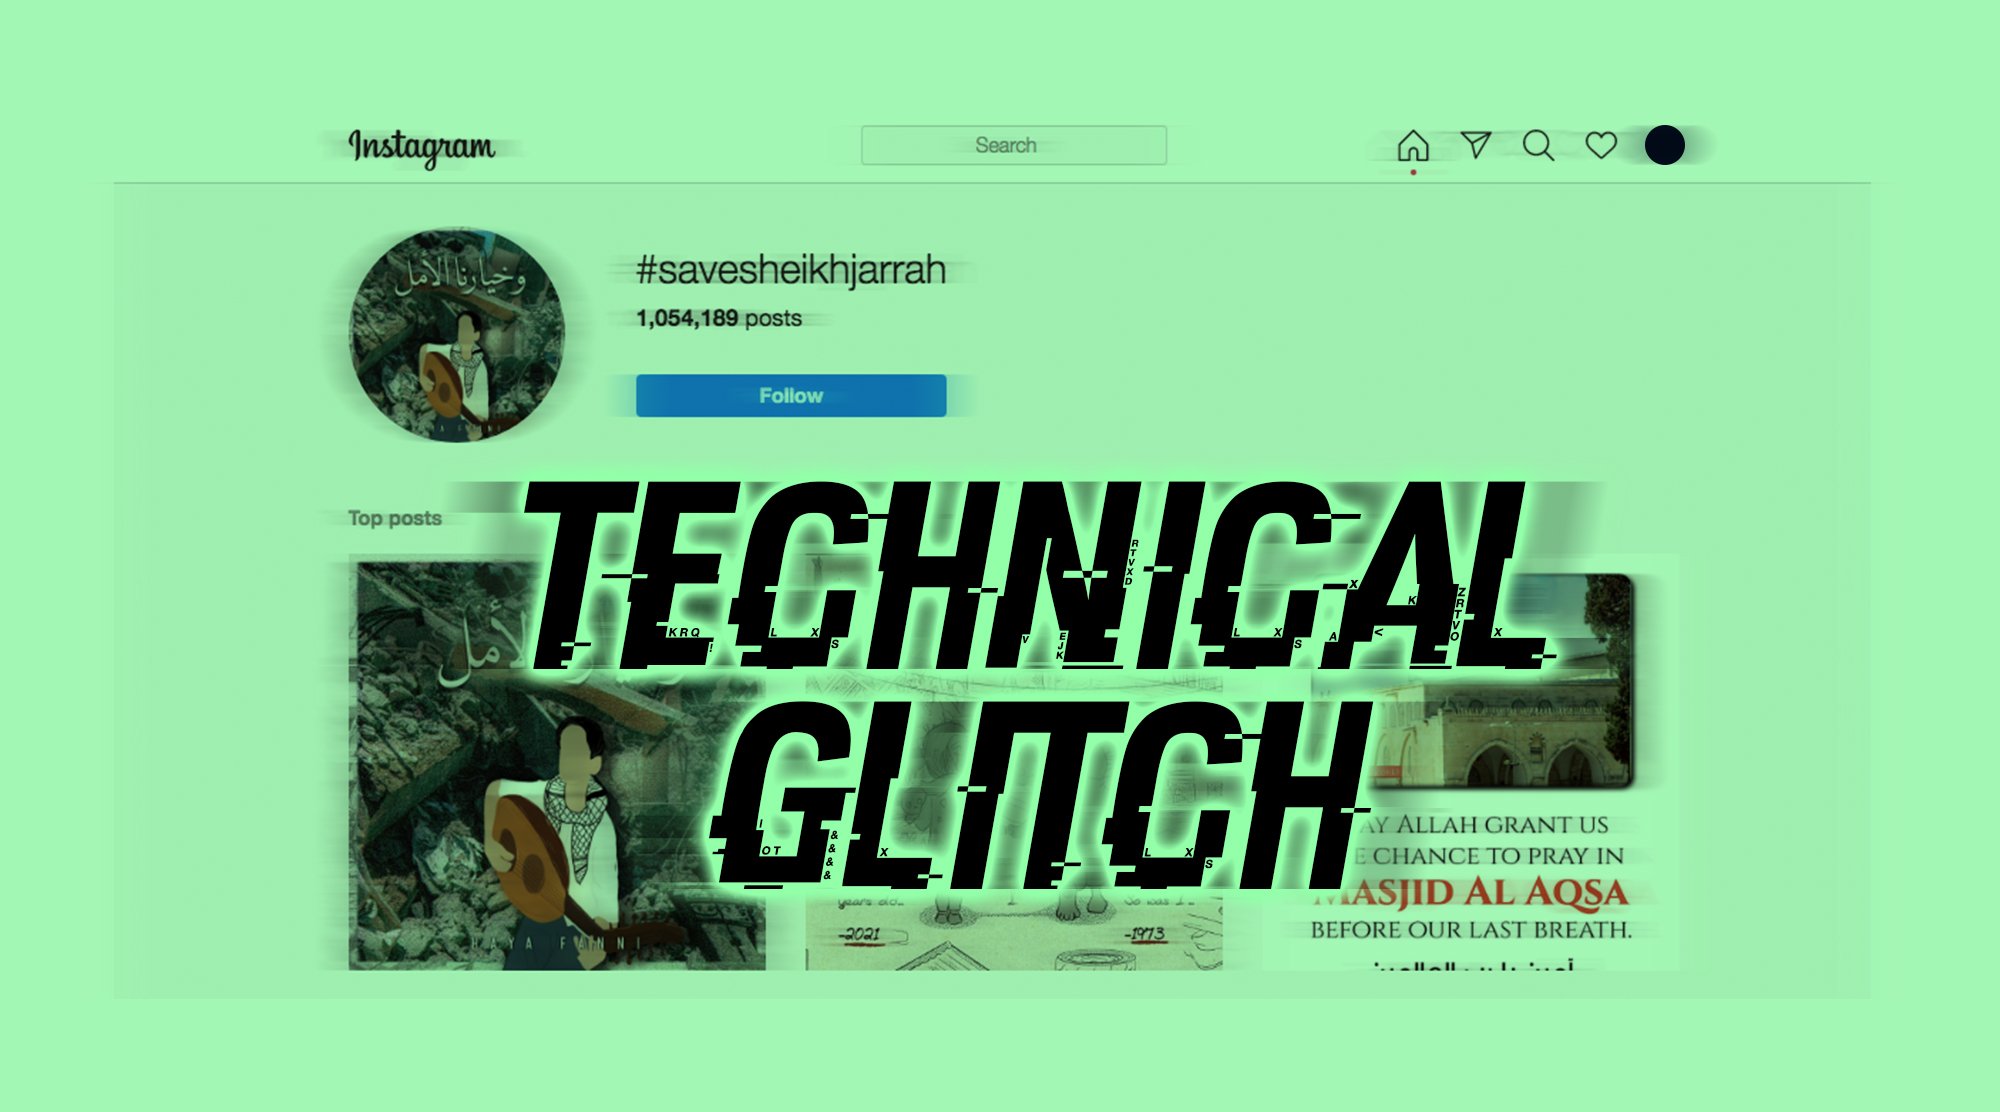 Double Check: Why are marginalized users most affected by 'technical glitches'?